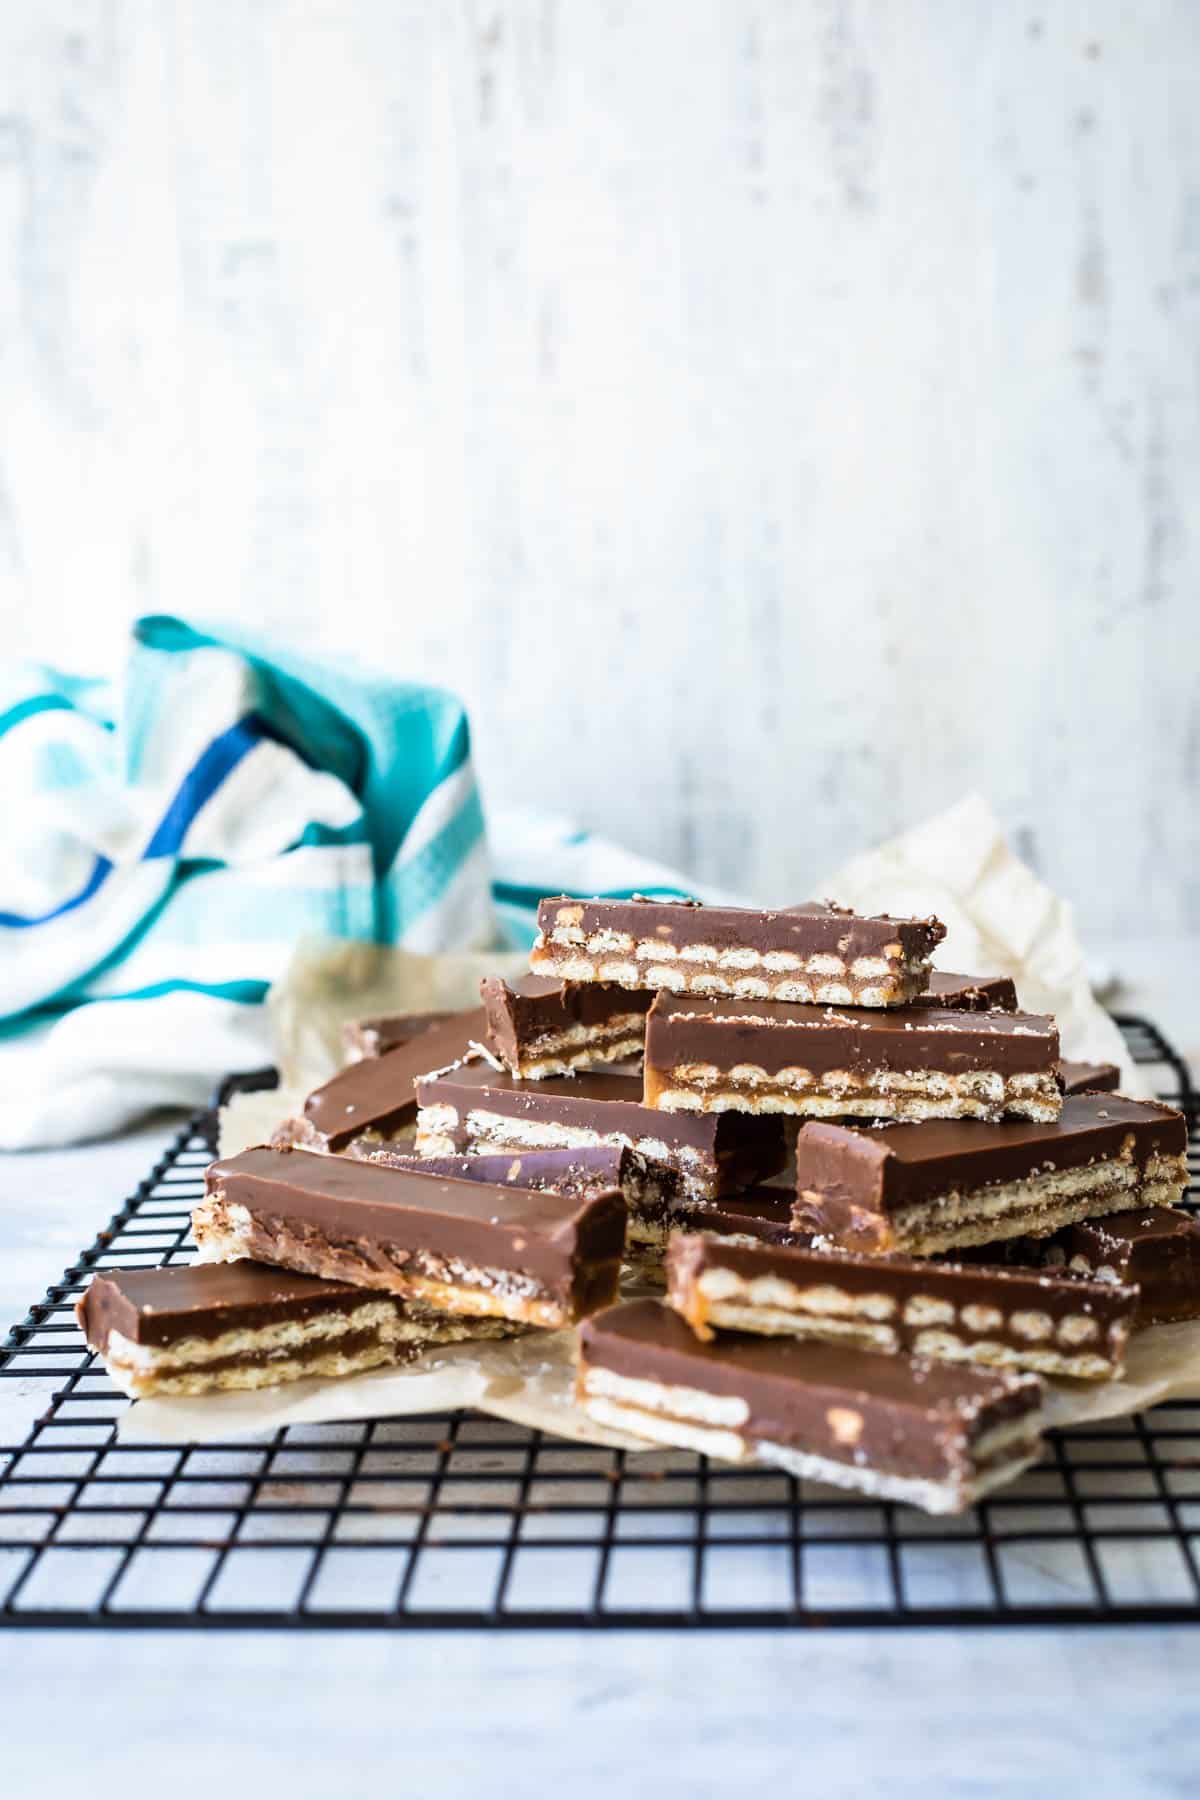 A cooling rack filled with neat slices of homemade twix bars.